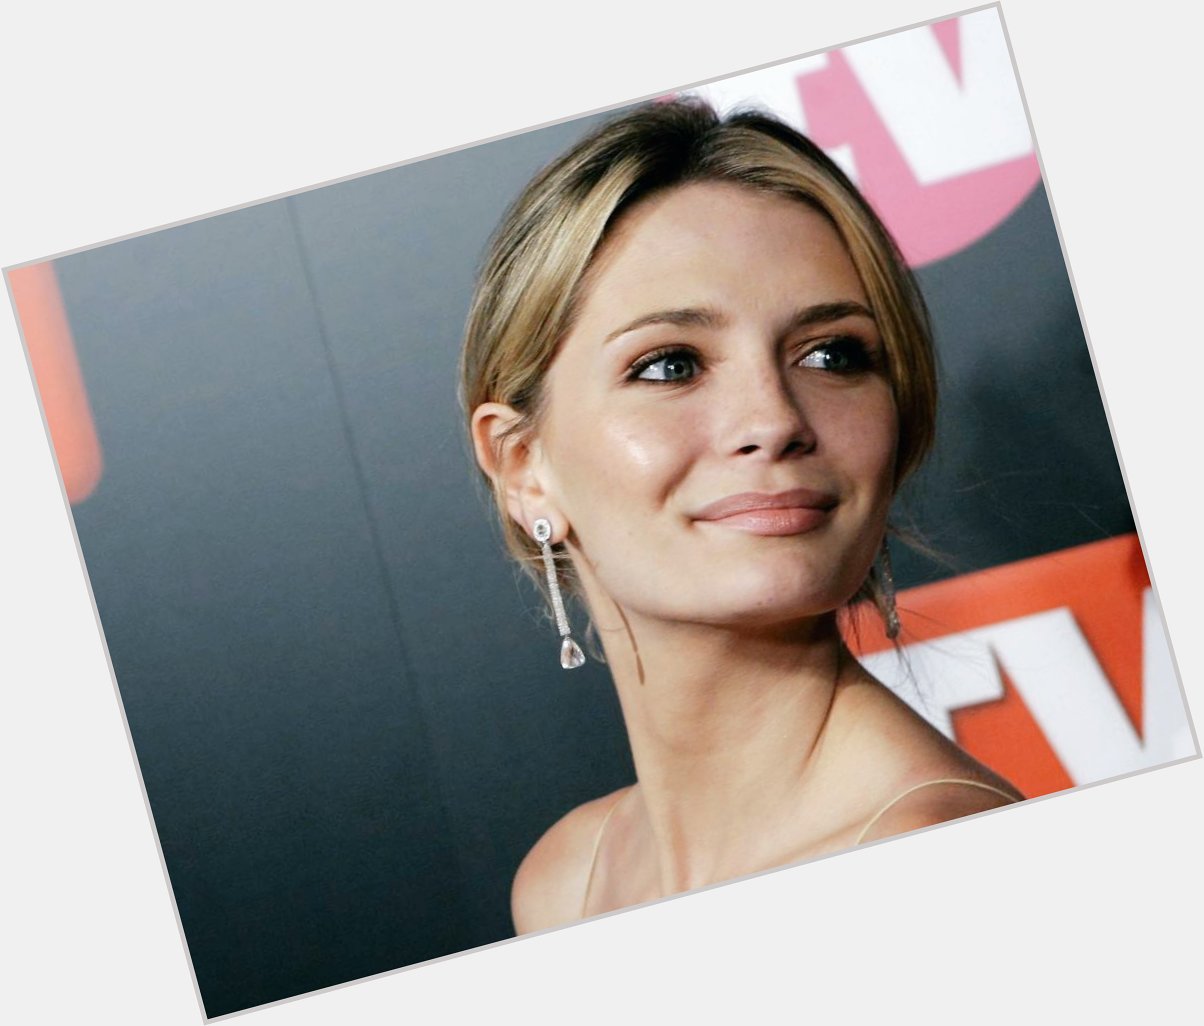 And happy birthday to this beauty that is Mischa Barton  